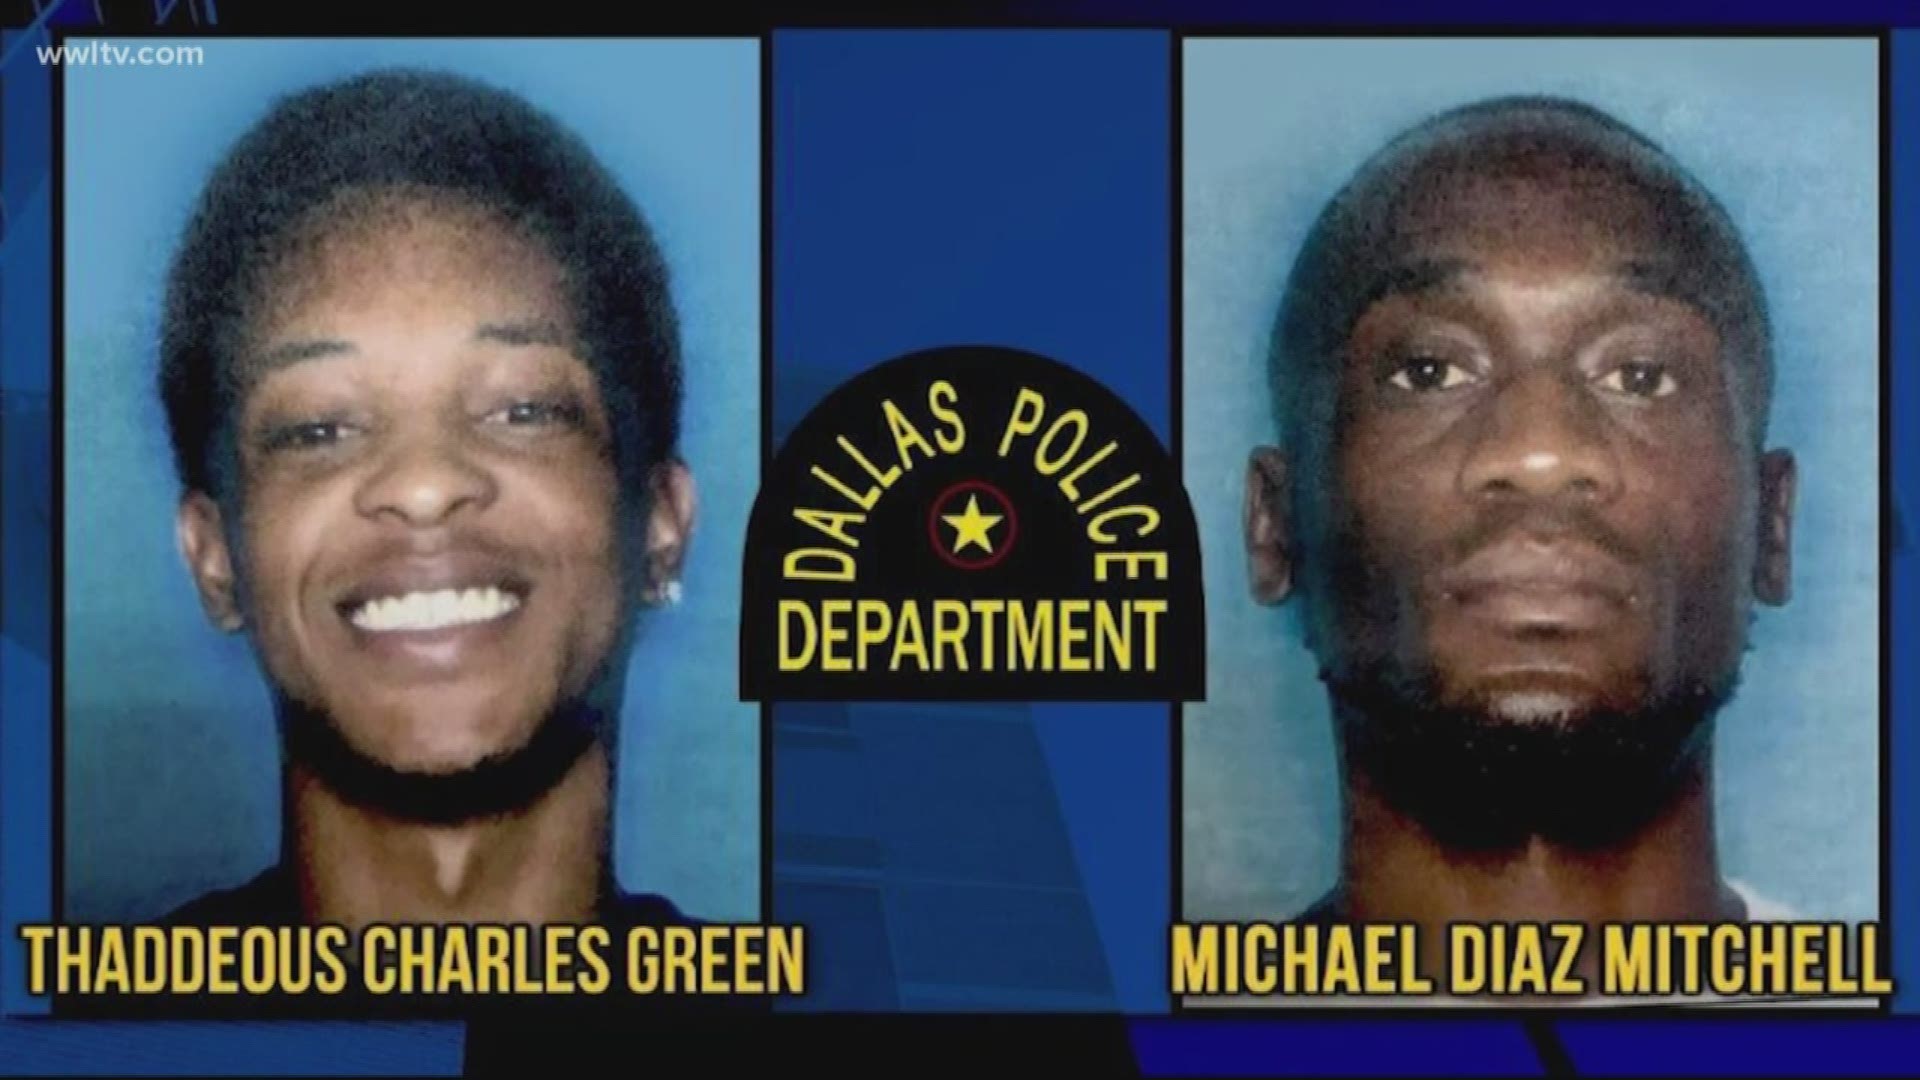 The men are from Alexandria, Louisiana, and investigators believe they were in Dallas to buy drugs from Joshua Brown.